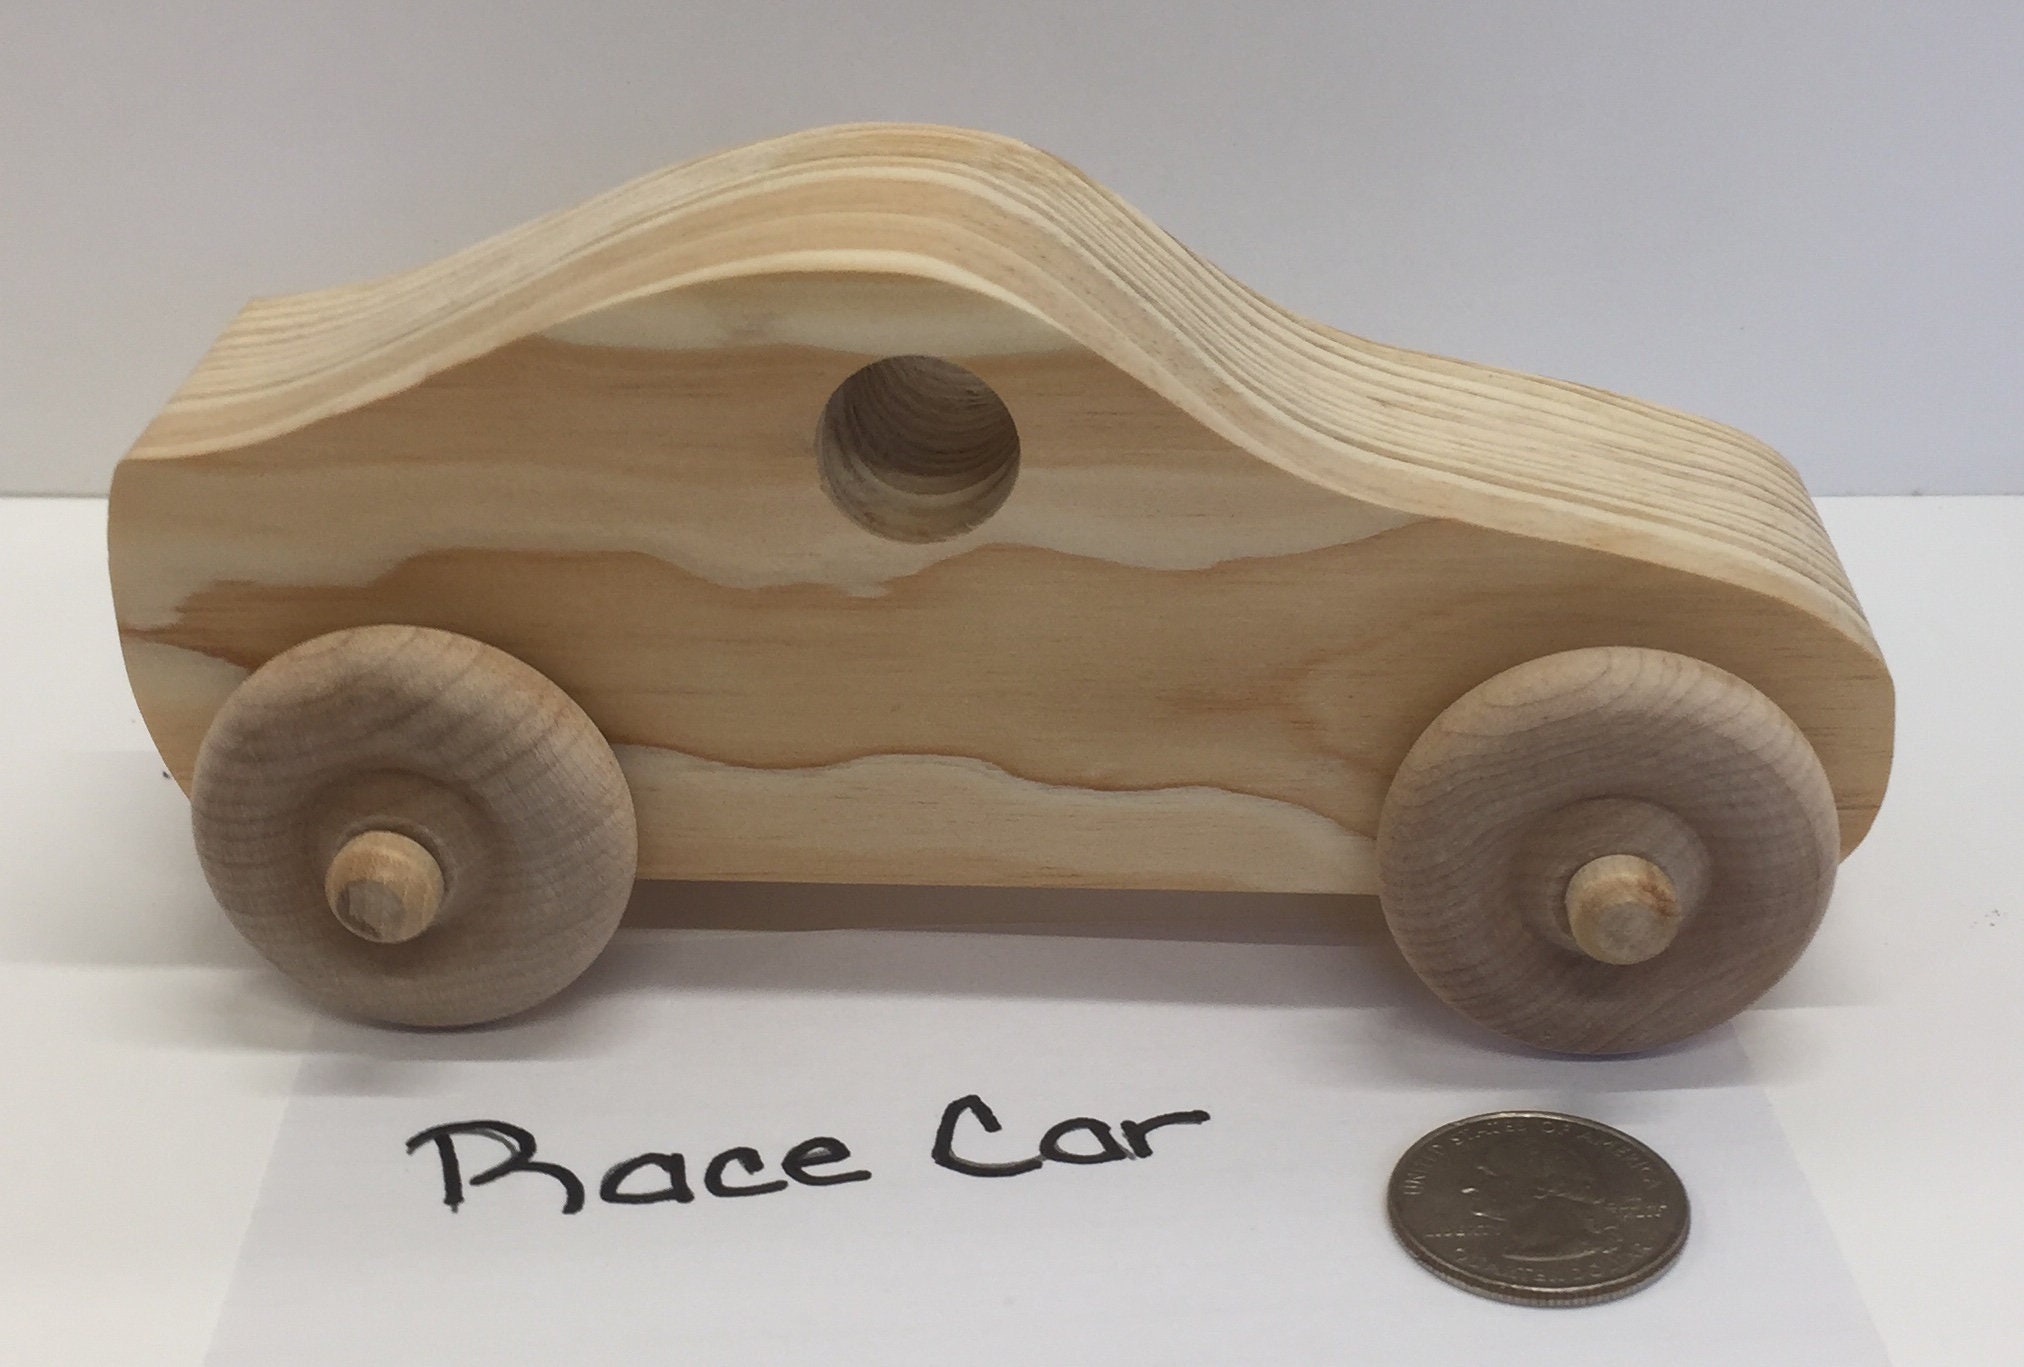 Making a Wooden Toy Race Car From Scrap Wood! // Easy Woodworking